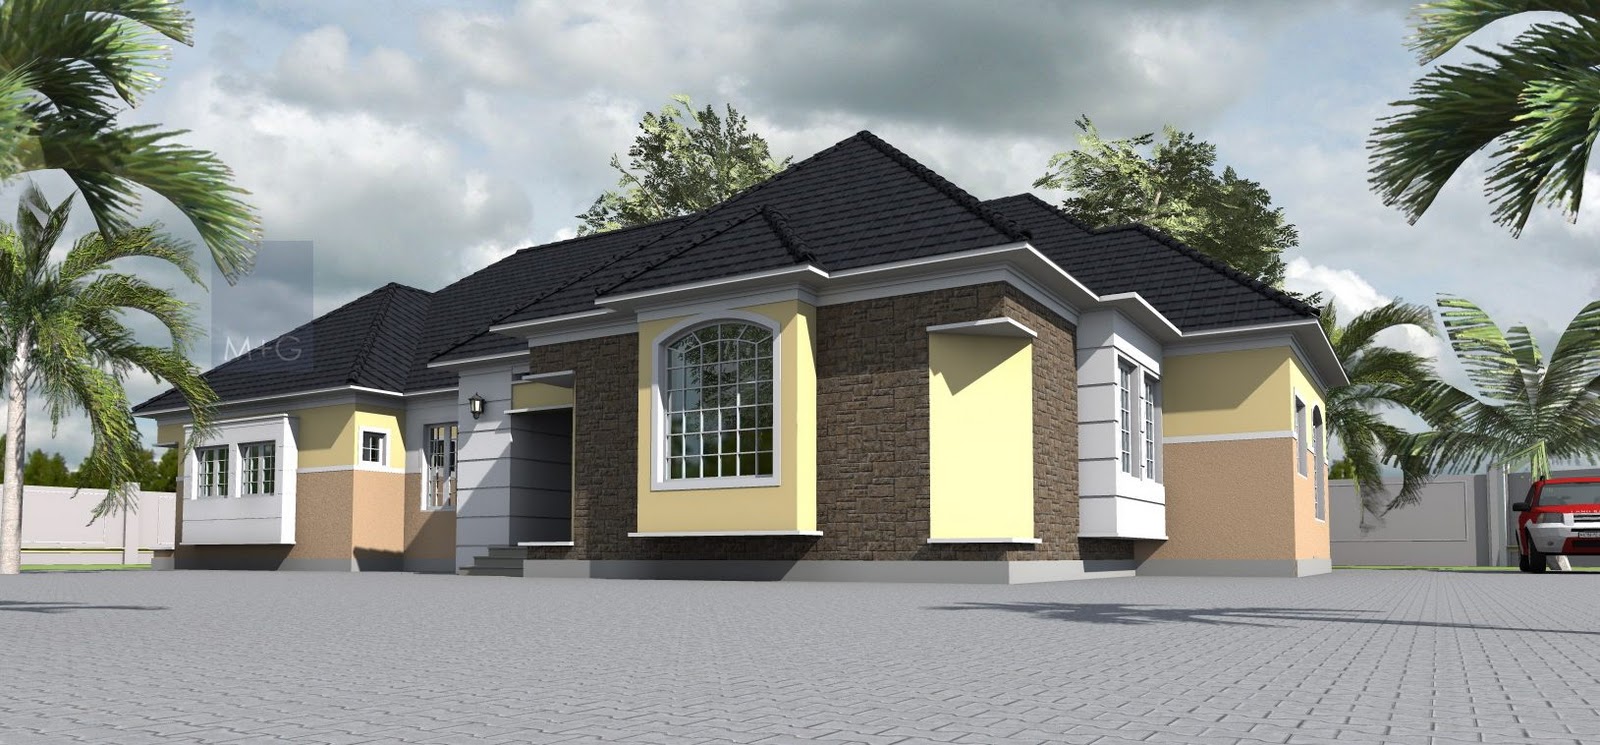 6 Bedroom Bungalow House Plans In Nigeria Modern House